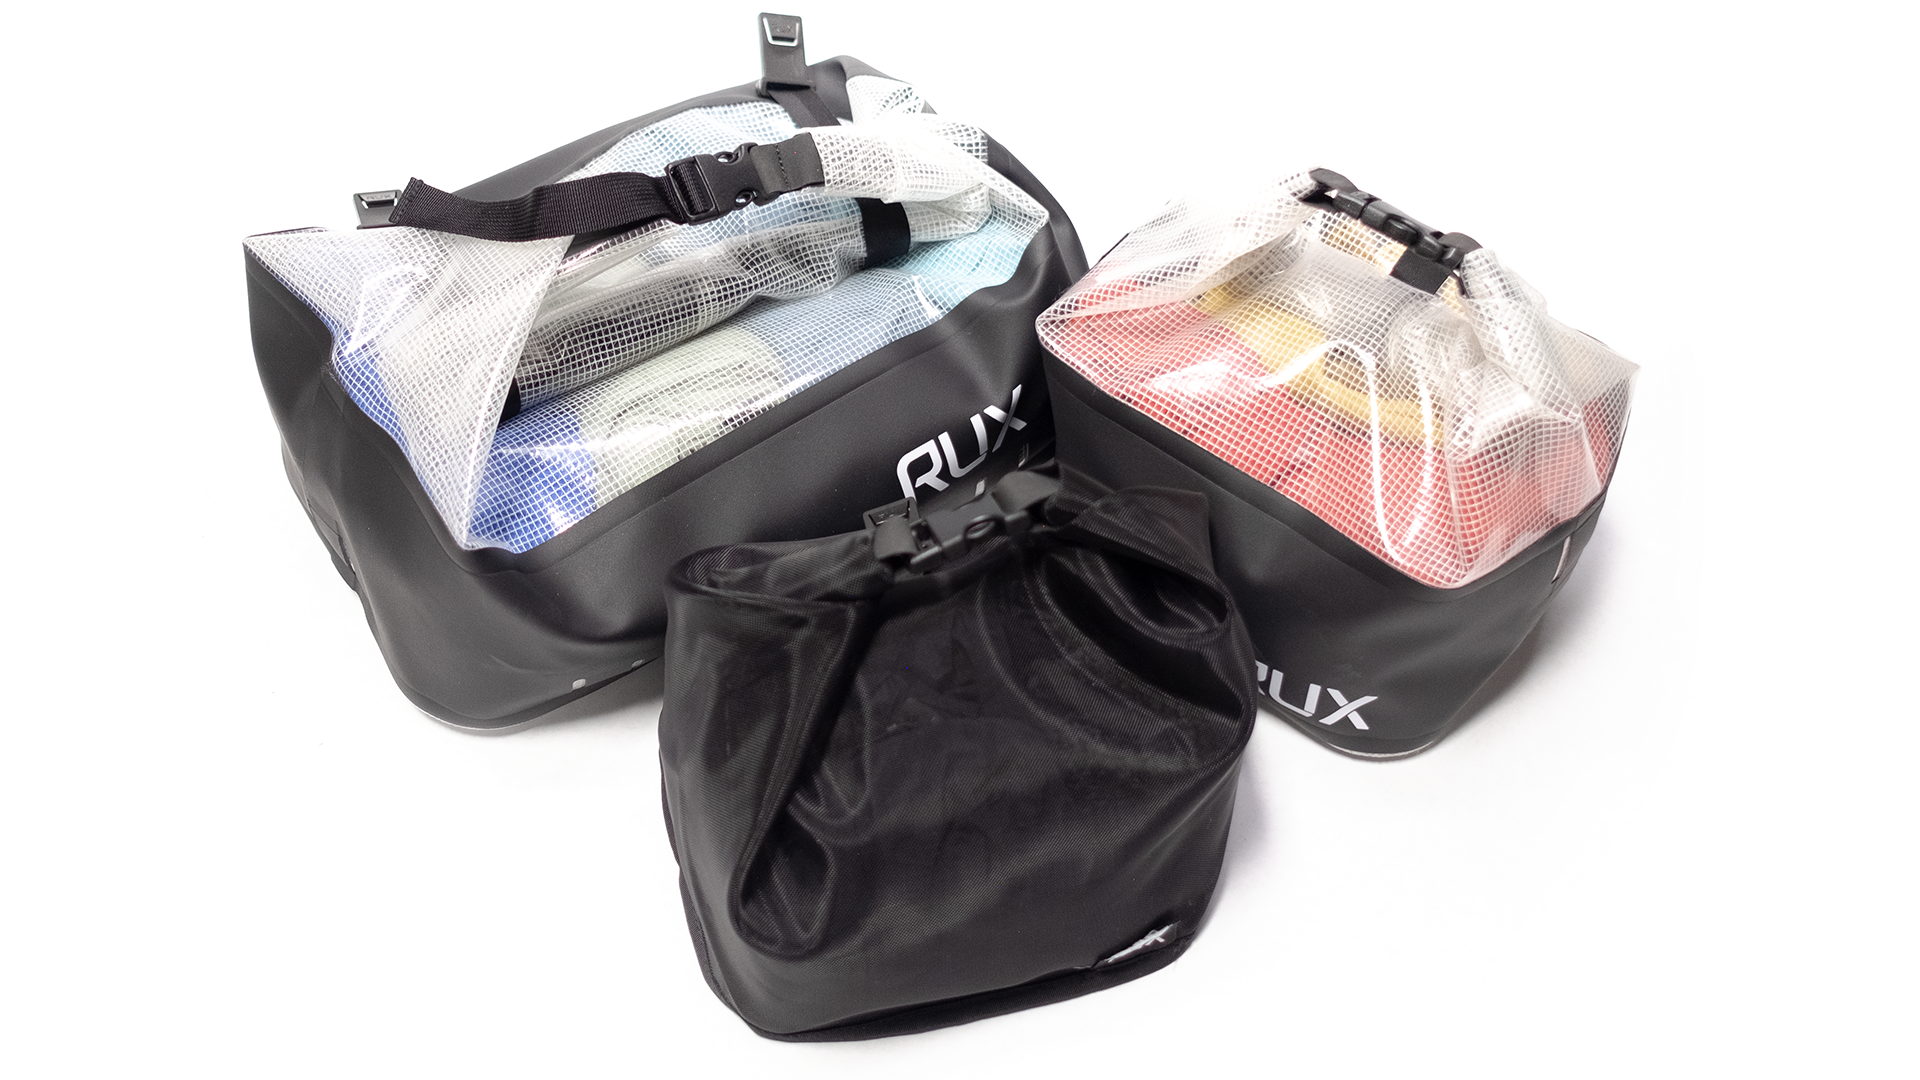 How to Use the RUX Packing System